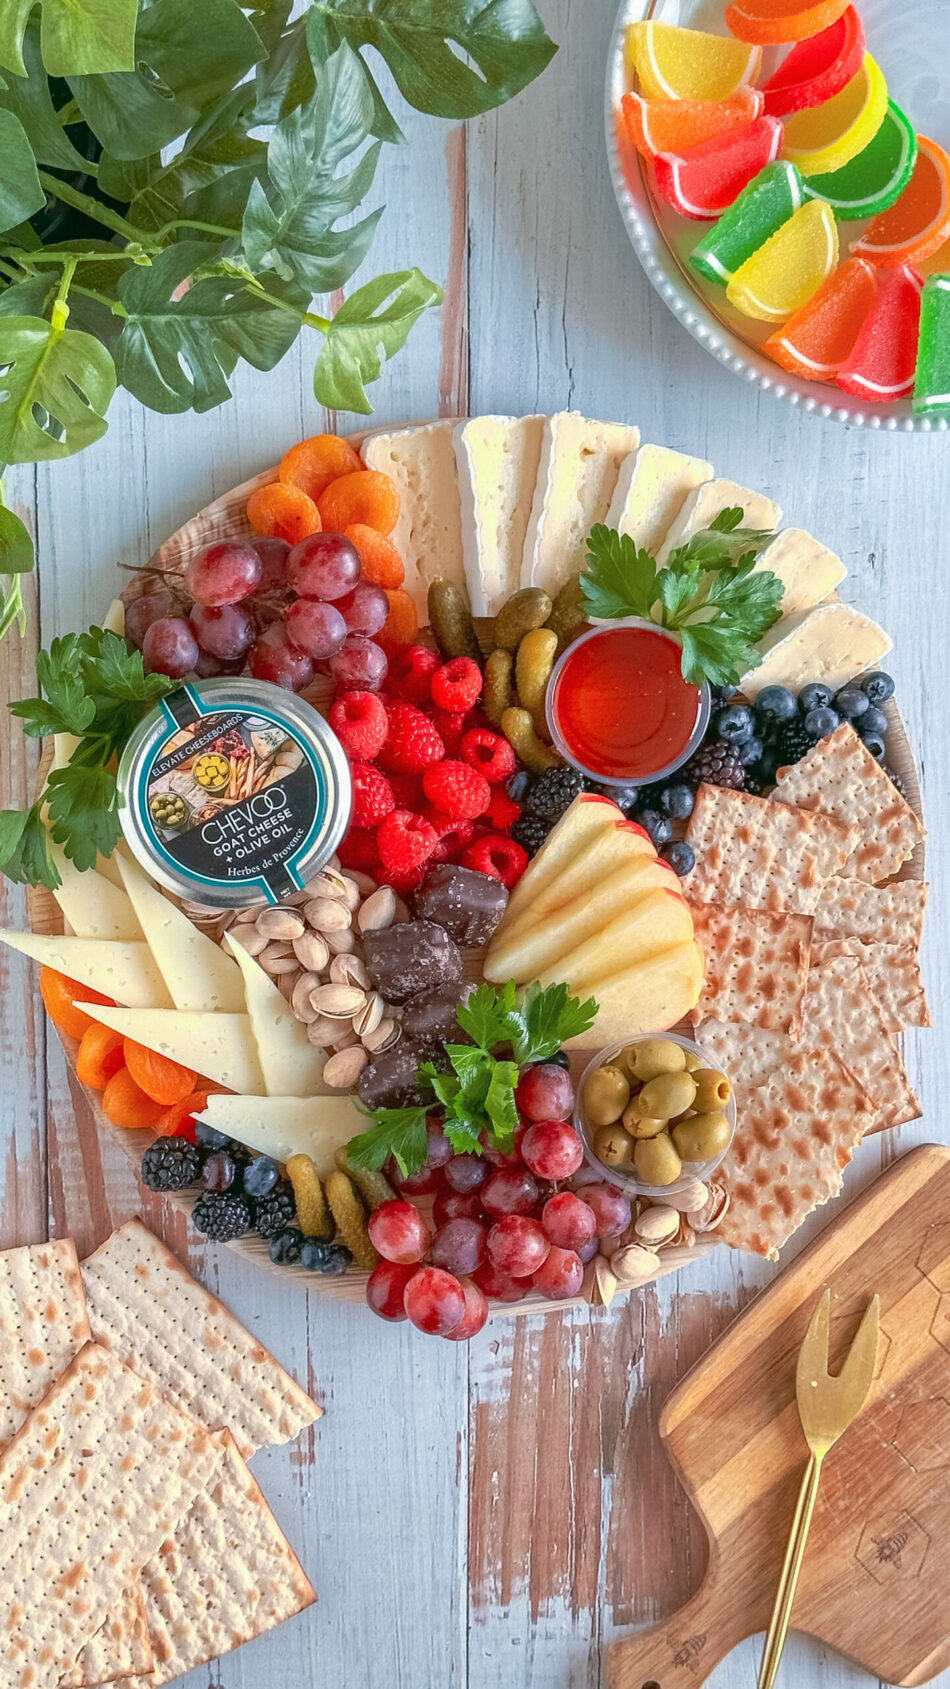 Easy-to-Make Passover Cheese Board – Charcuterie & Things